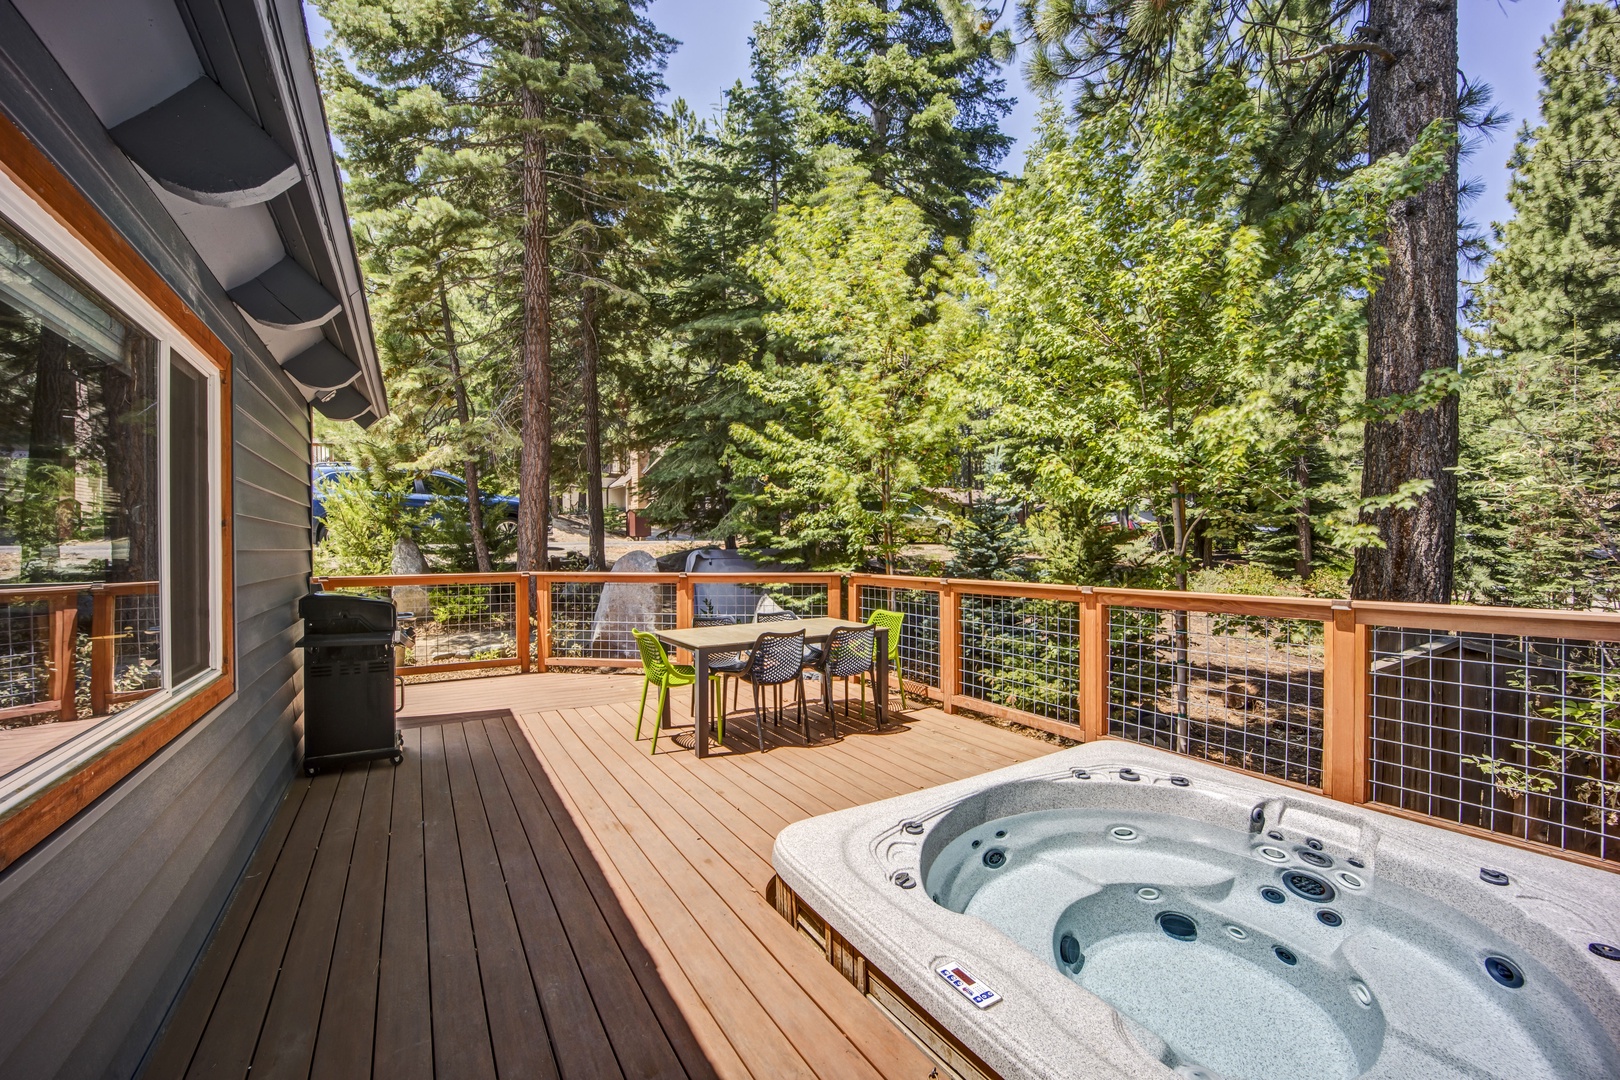 Large deck features hot tub